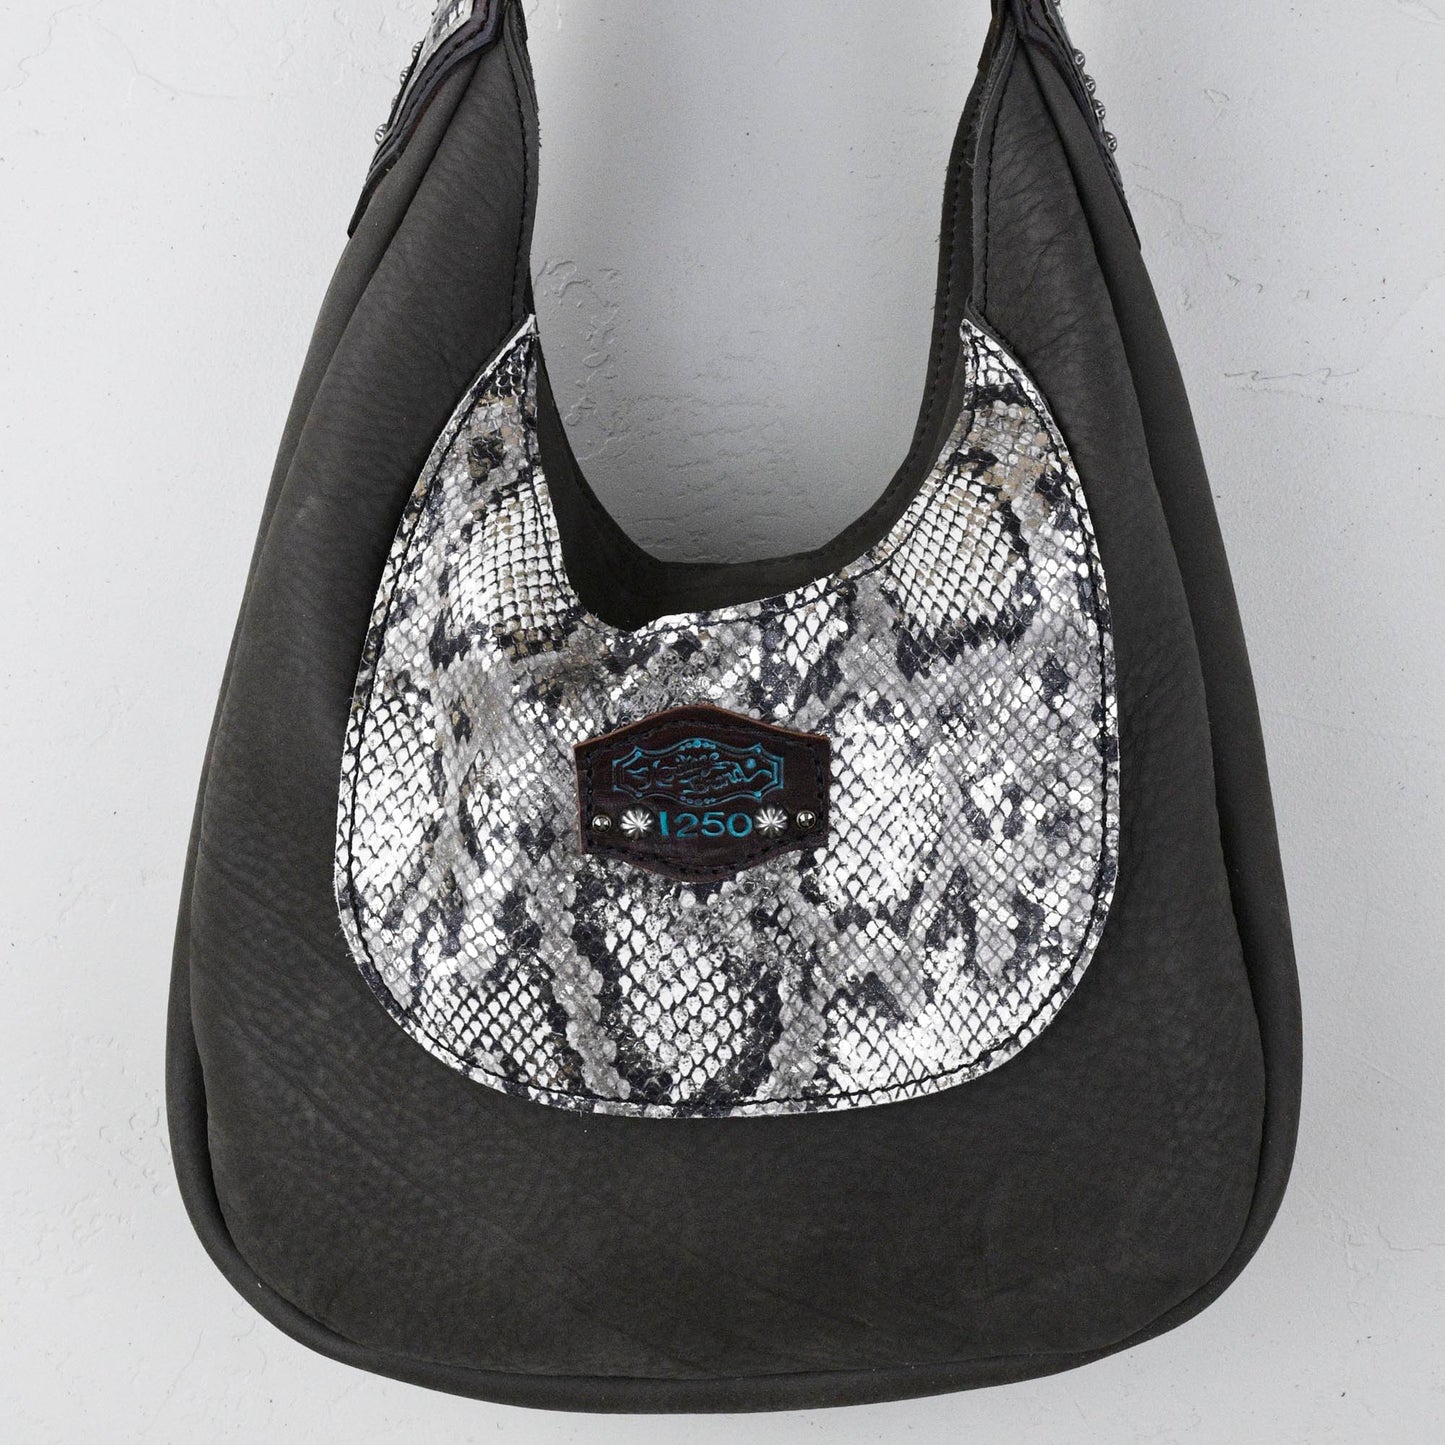 
                  
                    Replace "Black and silver hobo handbag with a snake skin pattern" with "Marilyn Bag #37 by Heritage Brand.
                  
                